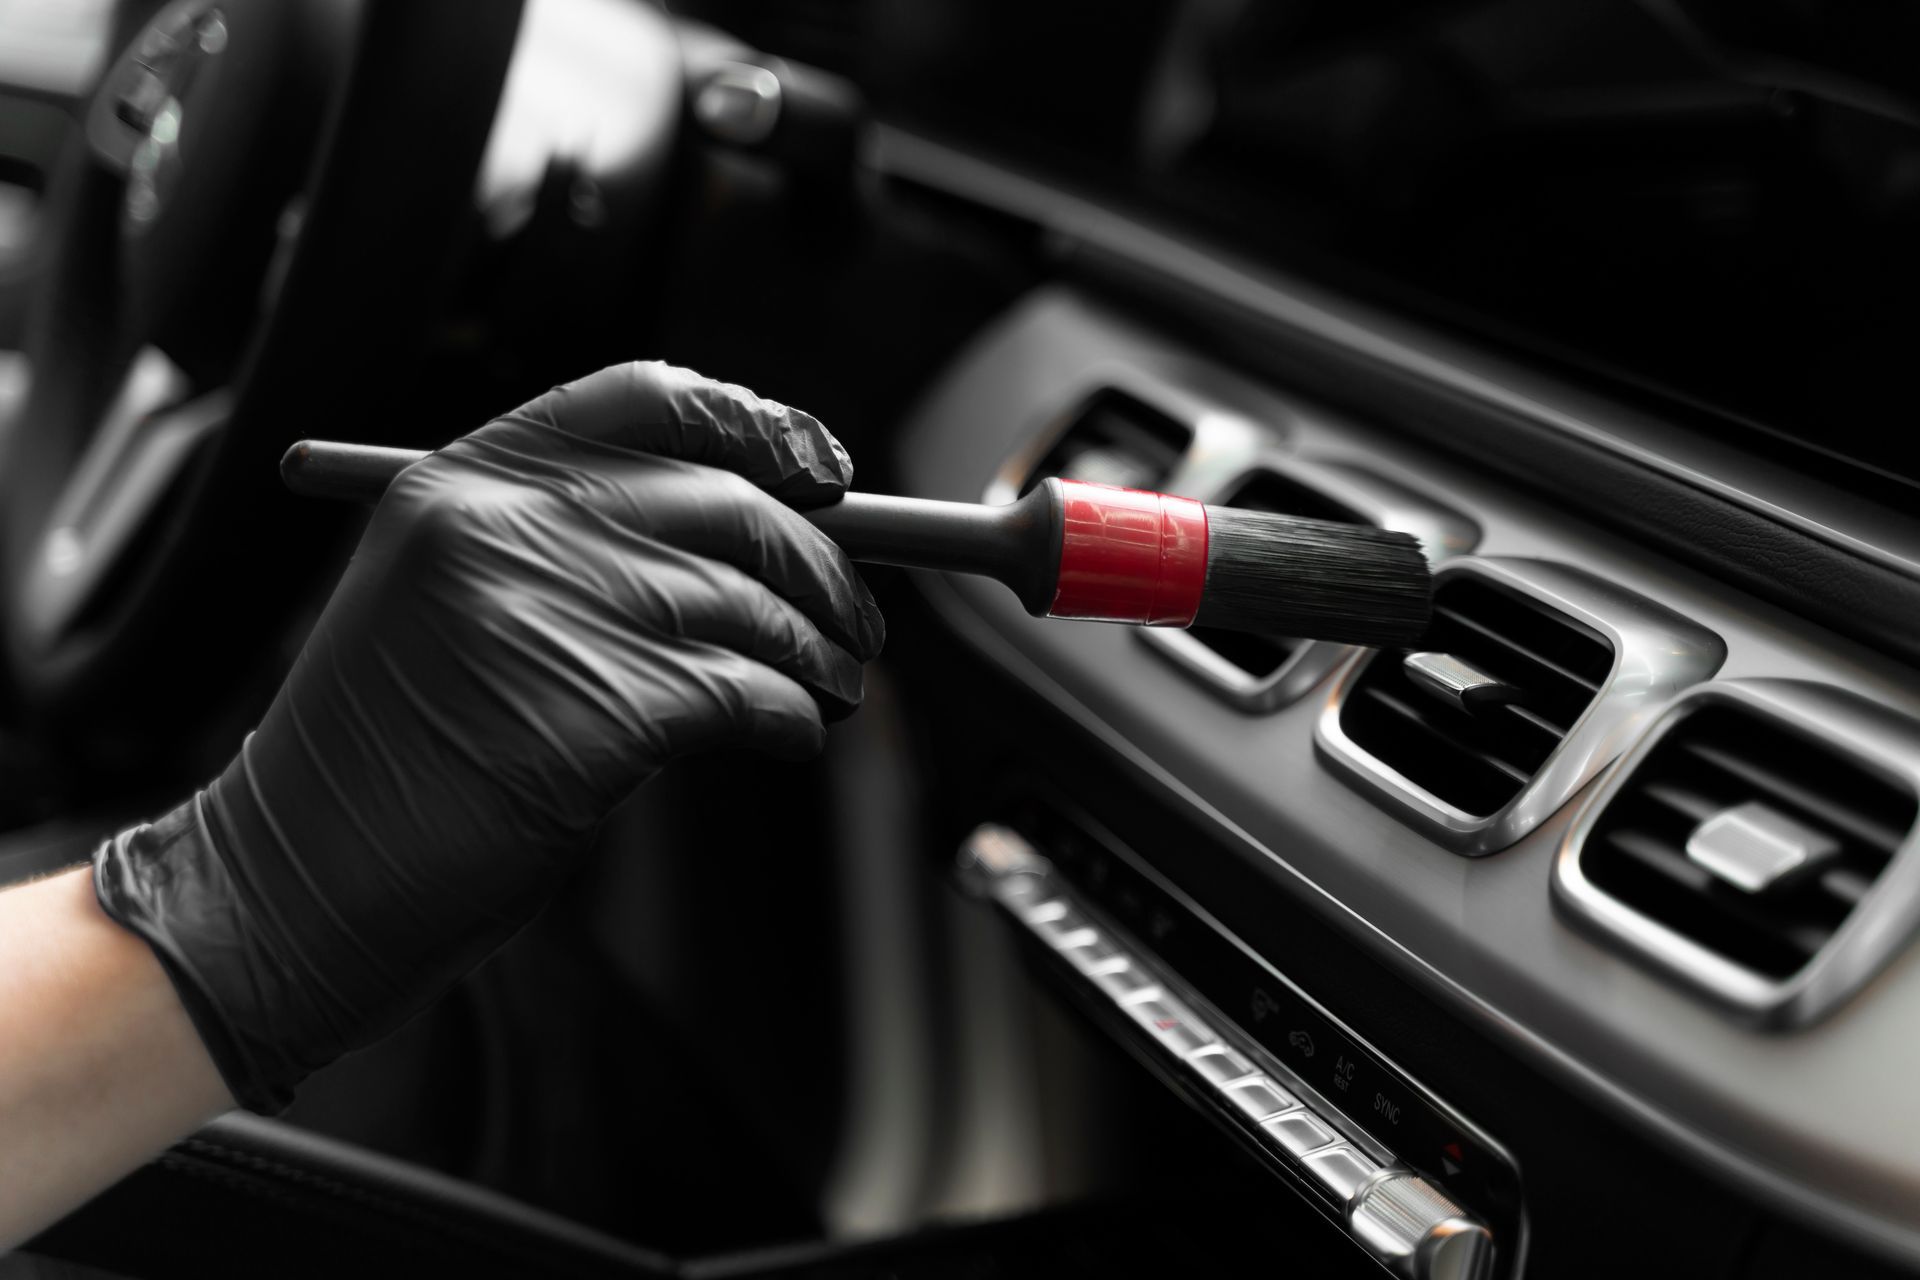 a person wearing black gloves is cleaning the air vents of a car with a brush .